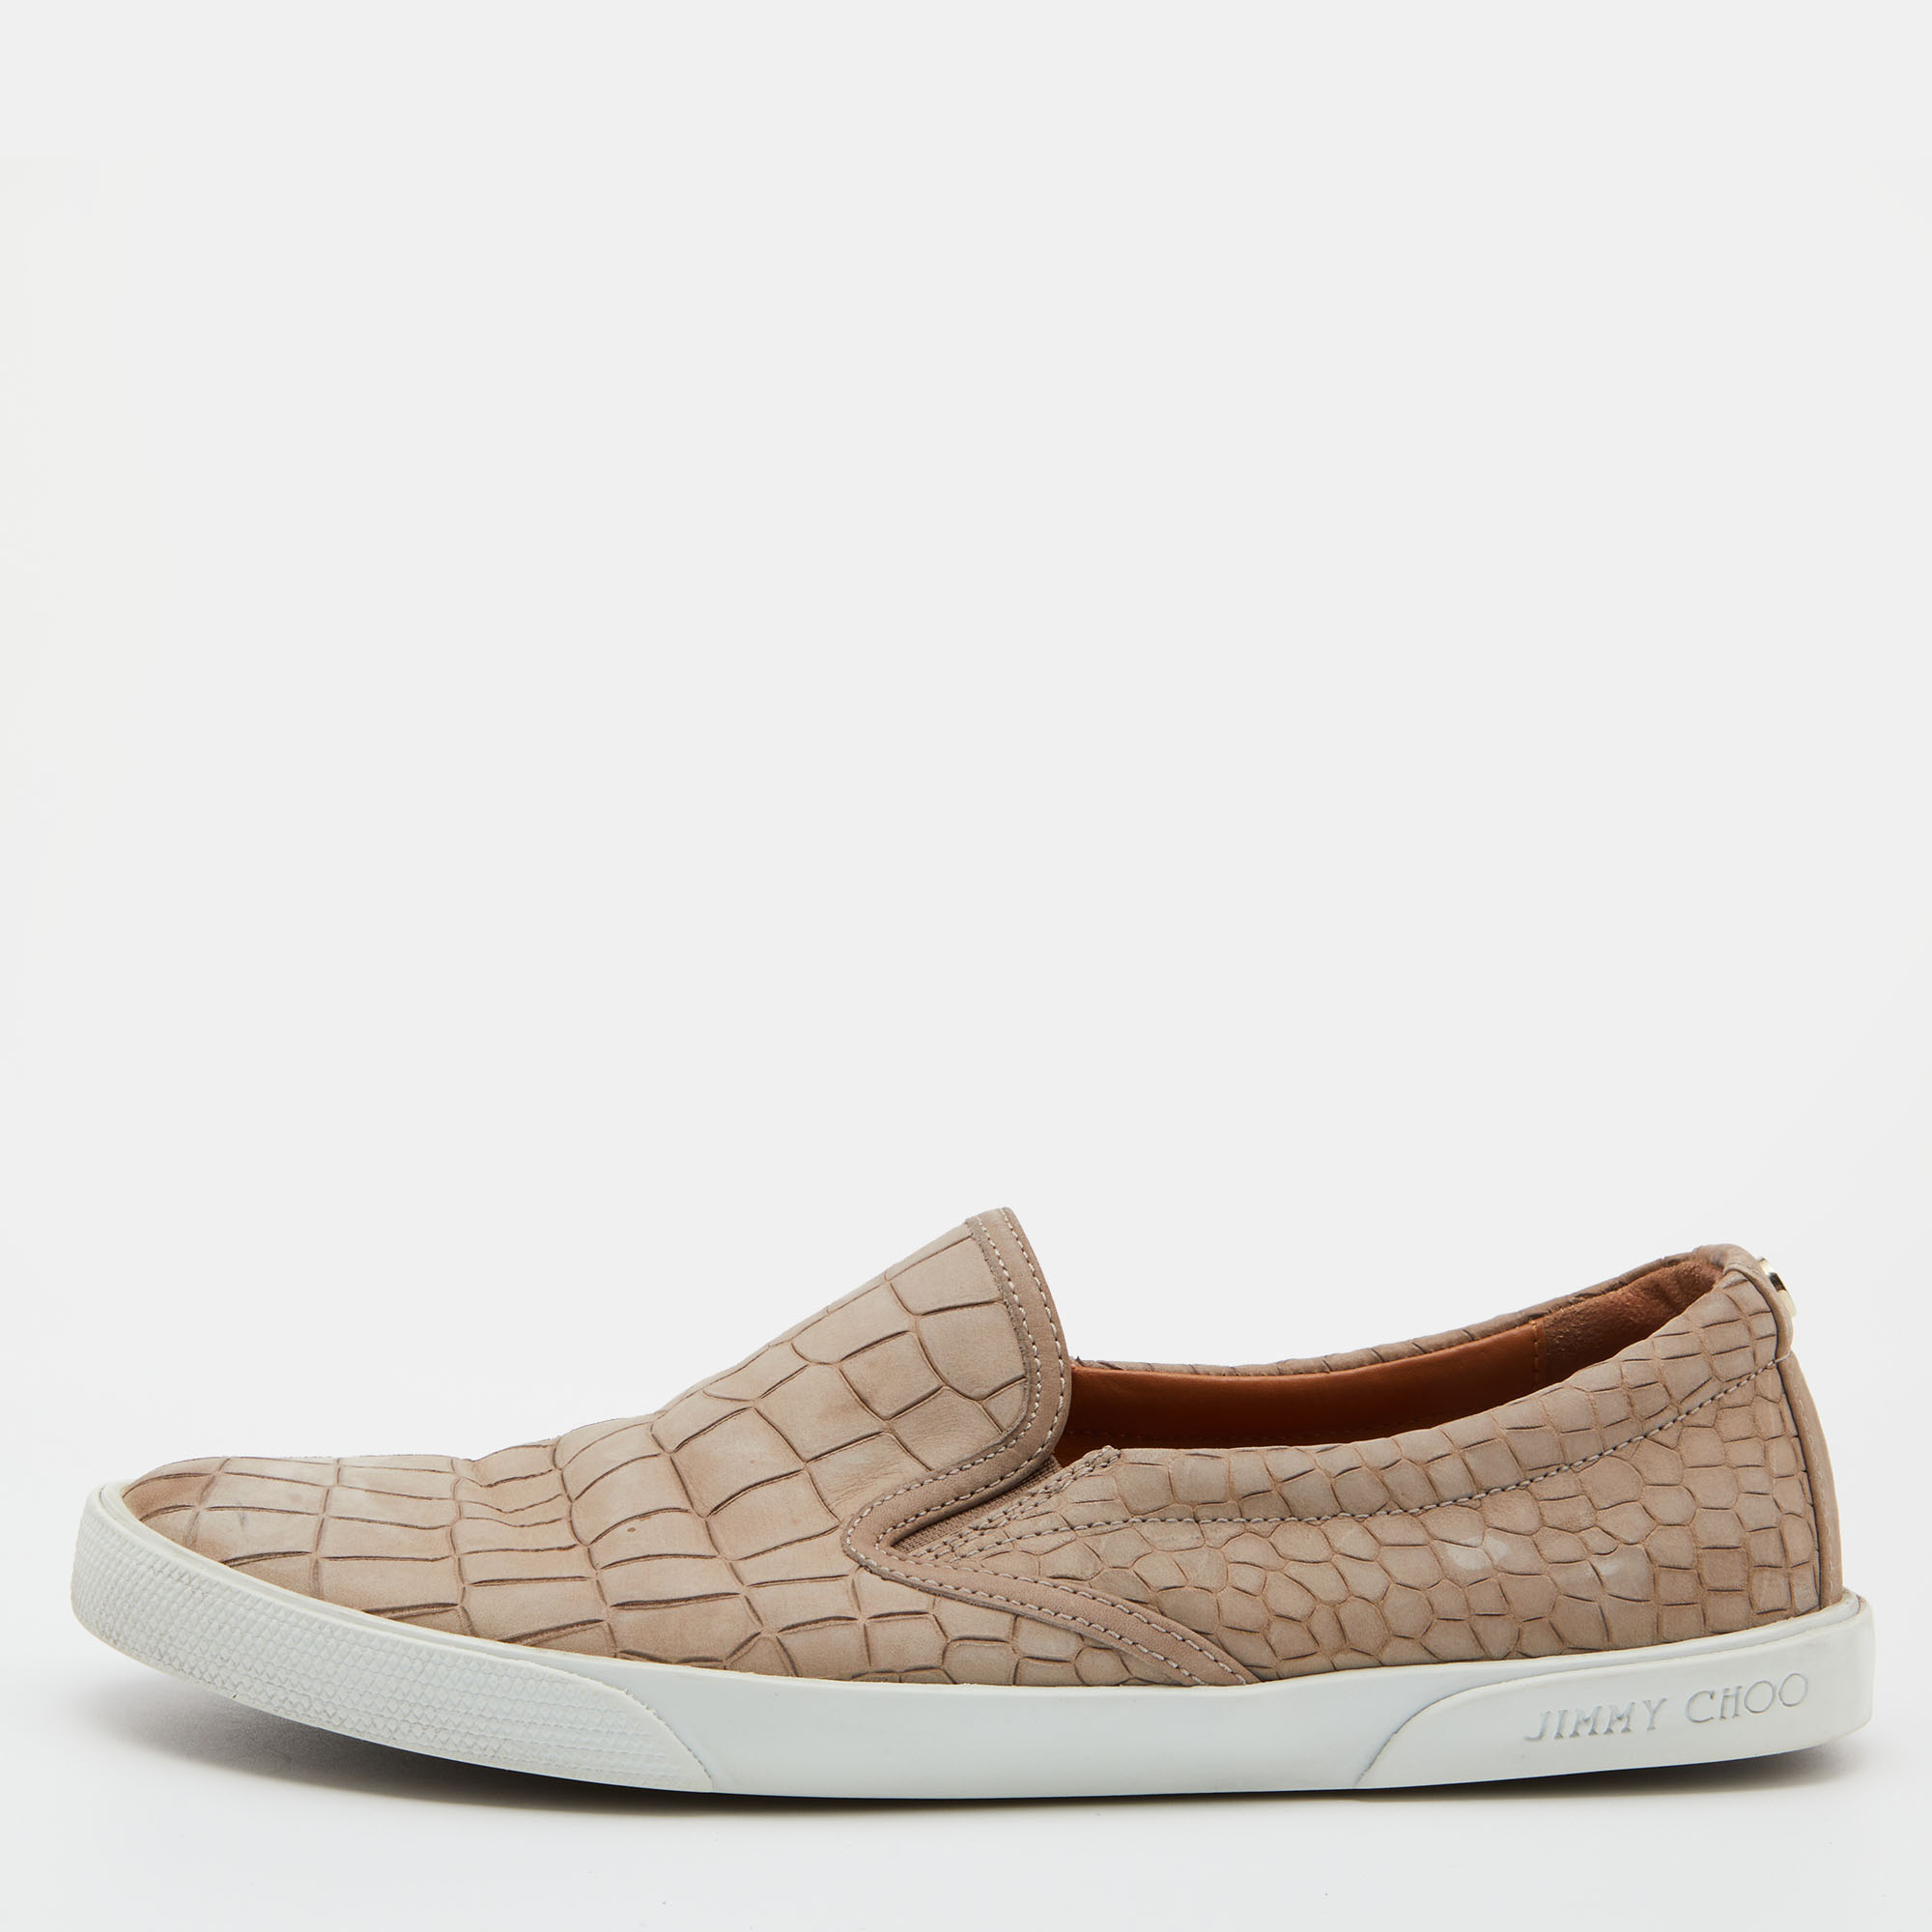 Jimmy Choo Taupe Croc Embossed Leather Slip On Sneakers Size 36.5